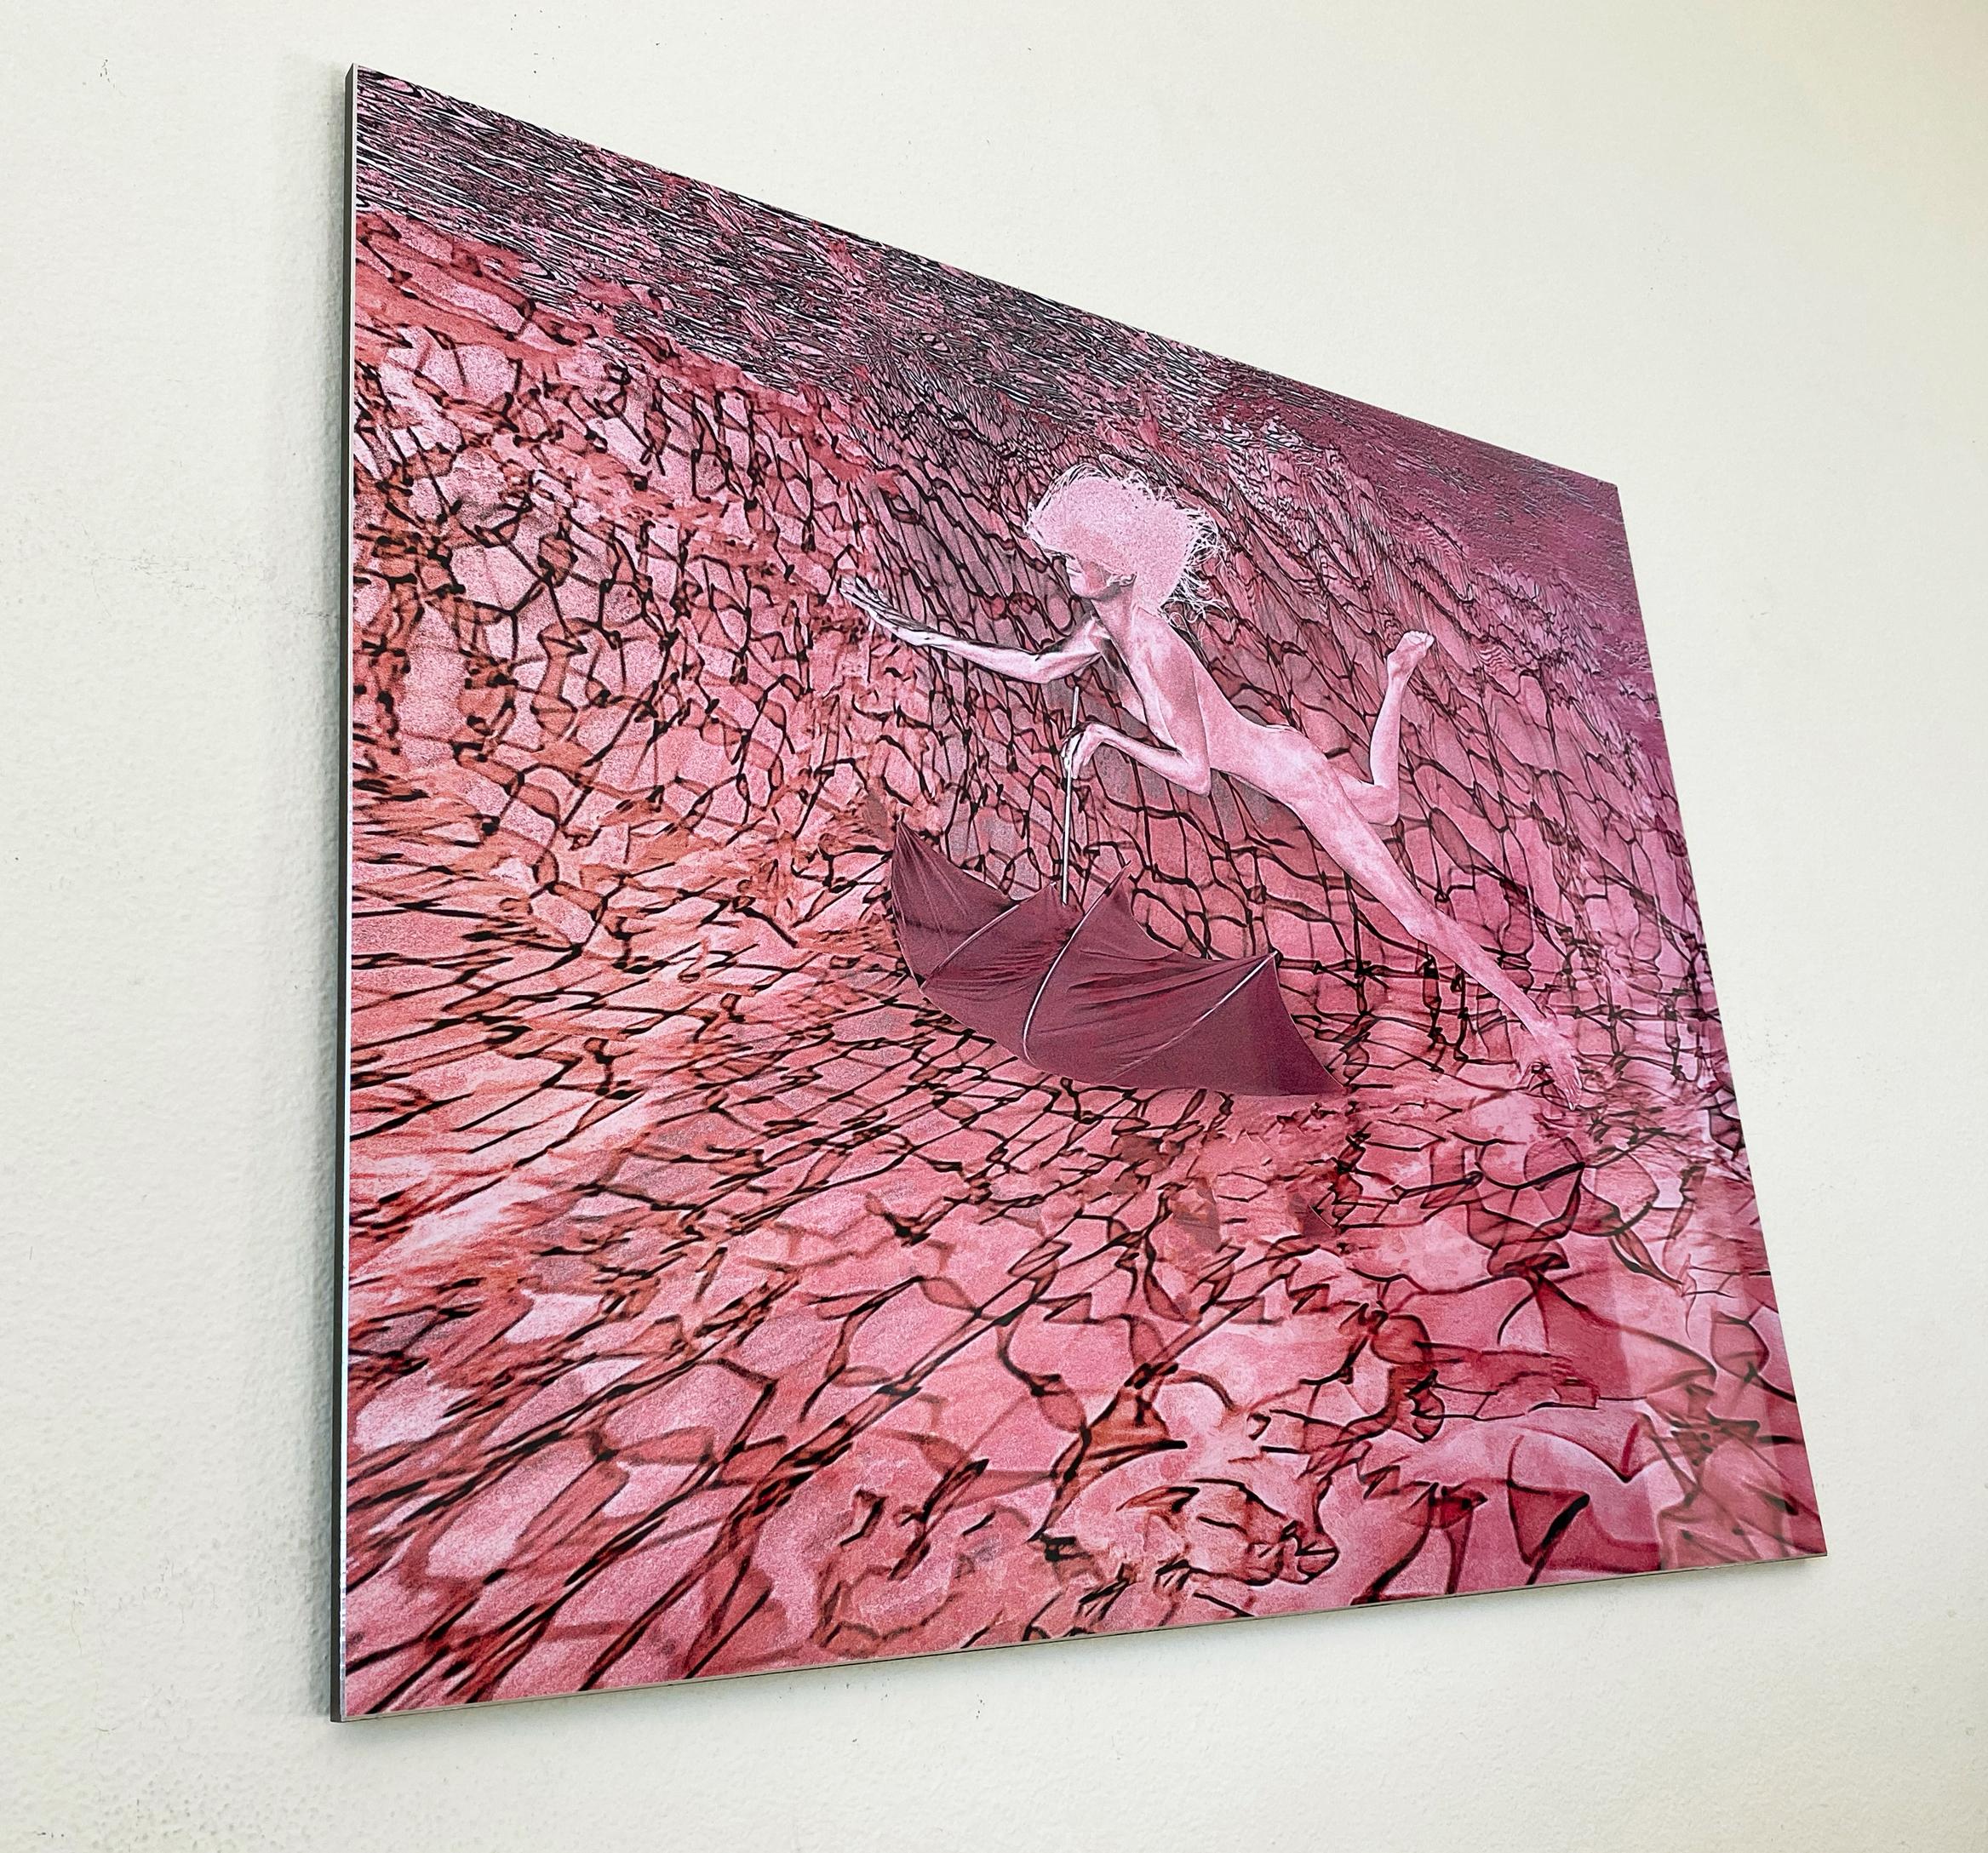 Pink Flight - underwater nude photograph - print on aluminum 30” x 36” - Photorealist Photograph by Alex Sher